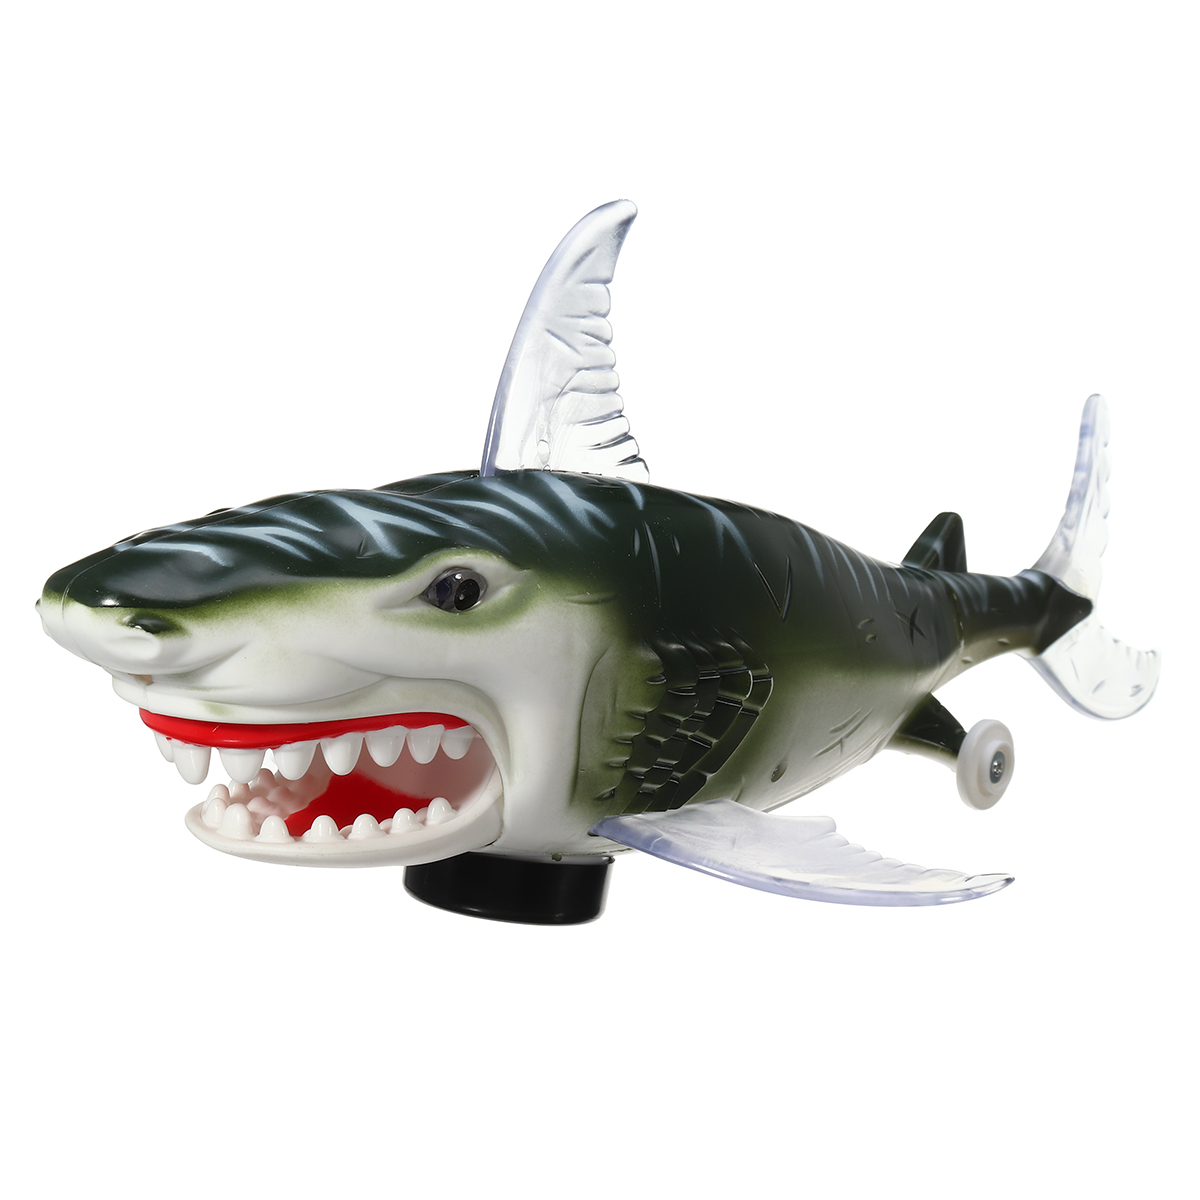 Electric-Projection-Light-Sound-Shark-Walking-Animal-Educational-Toys-for-Kids-Gift-1678213-3